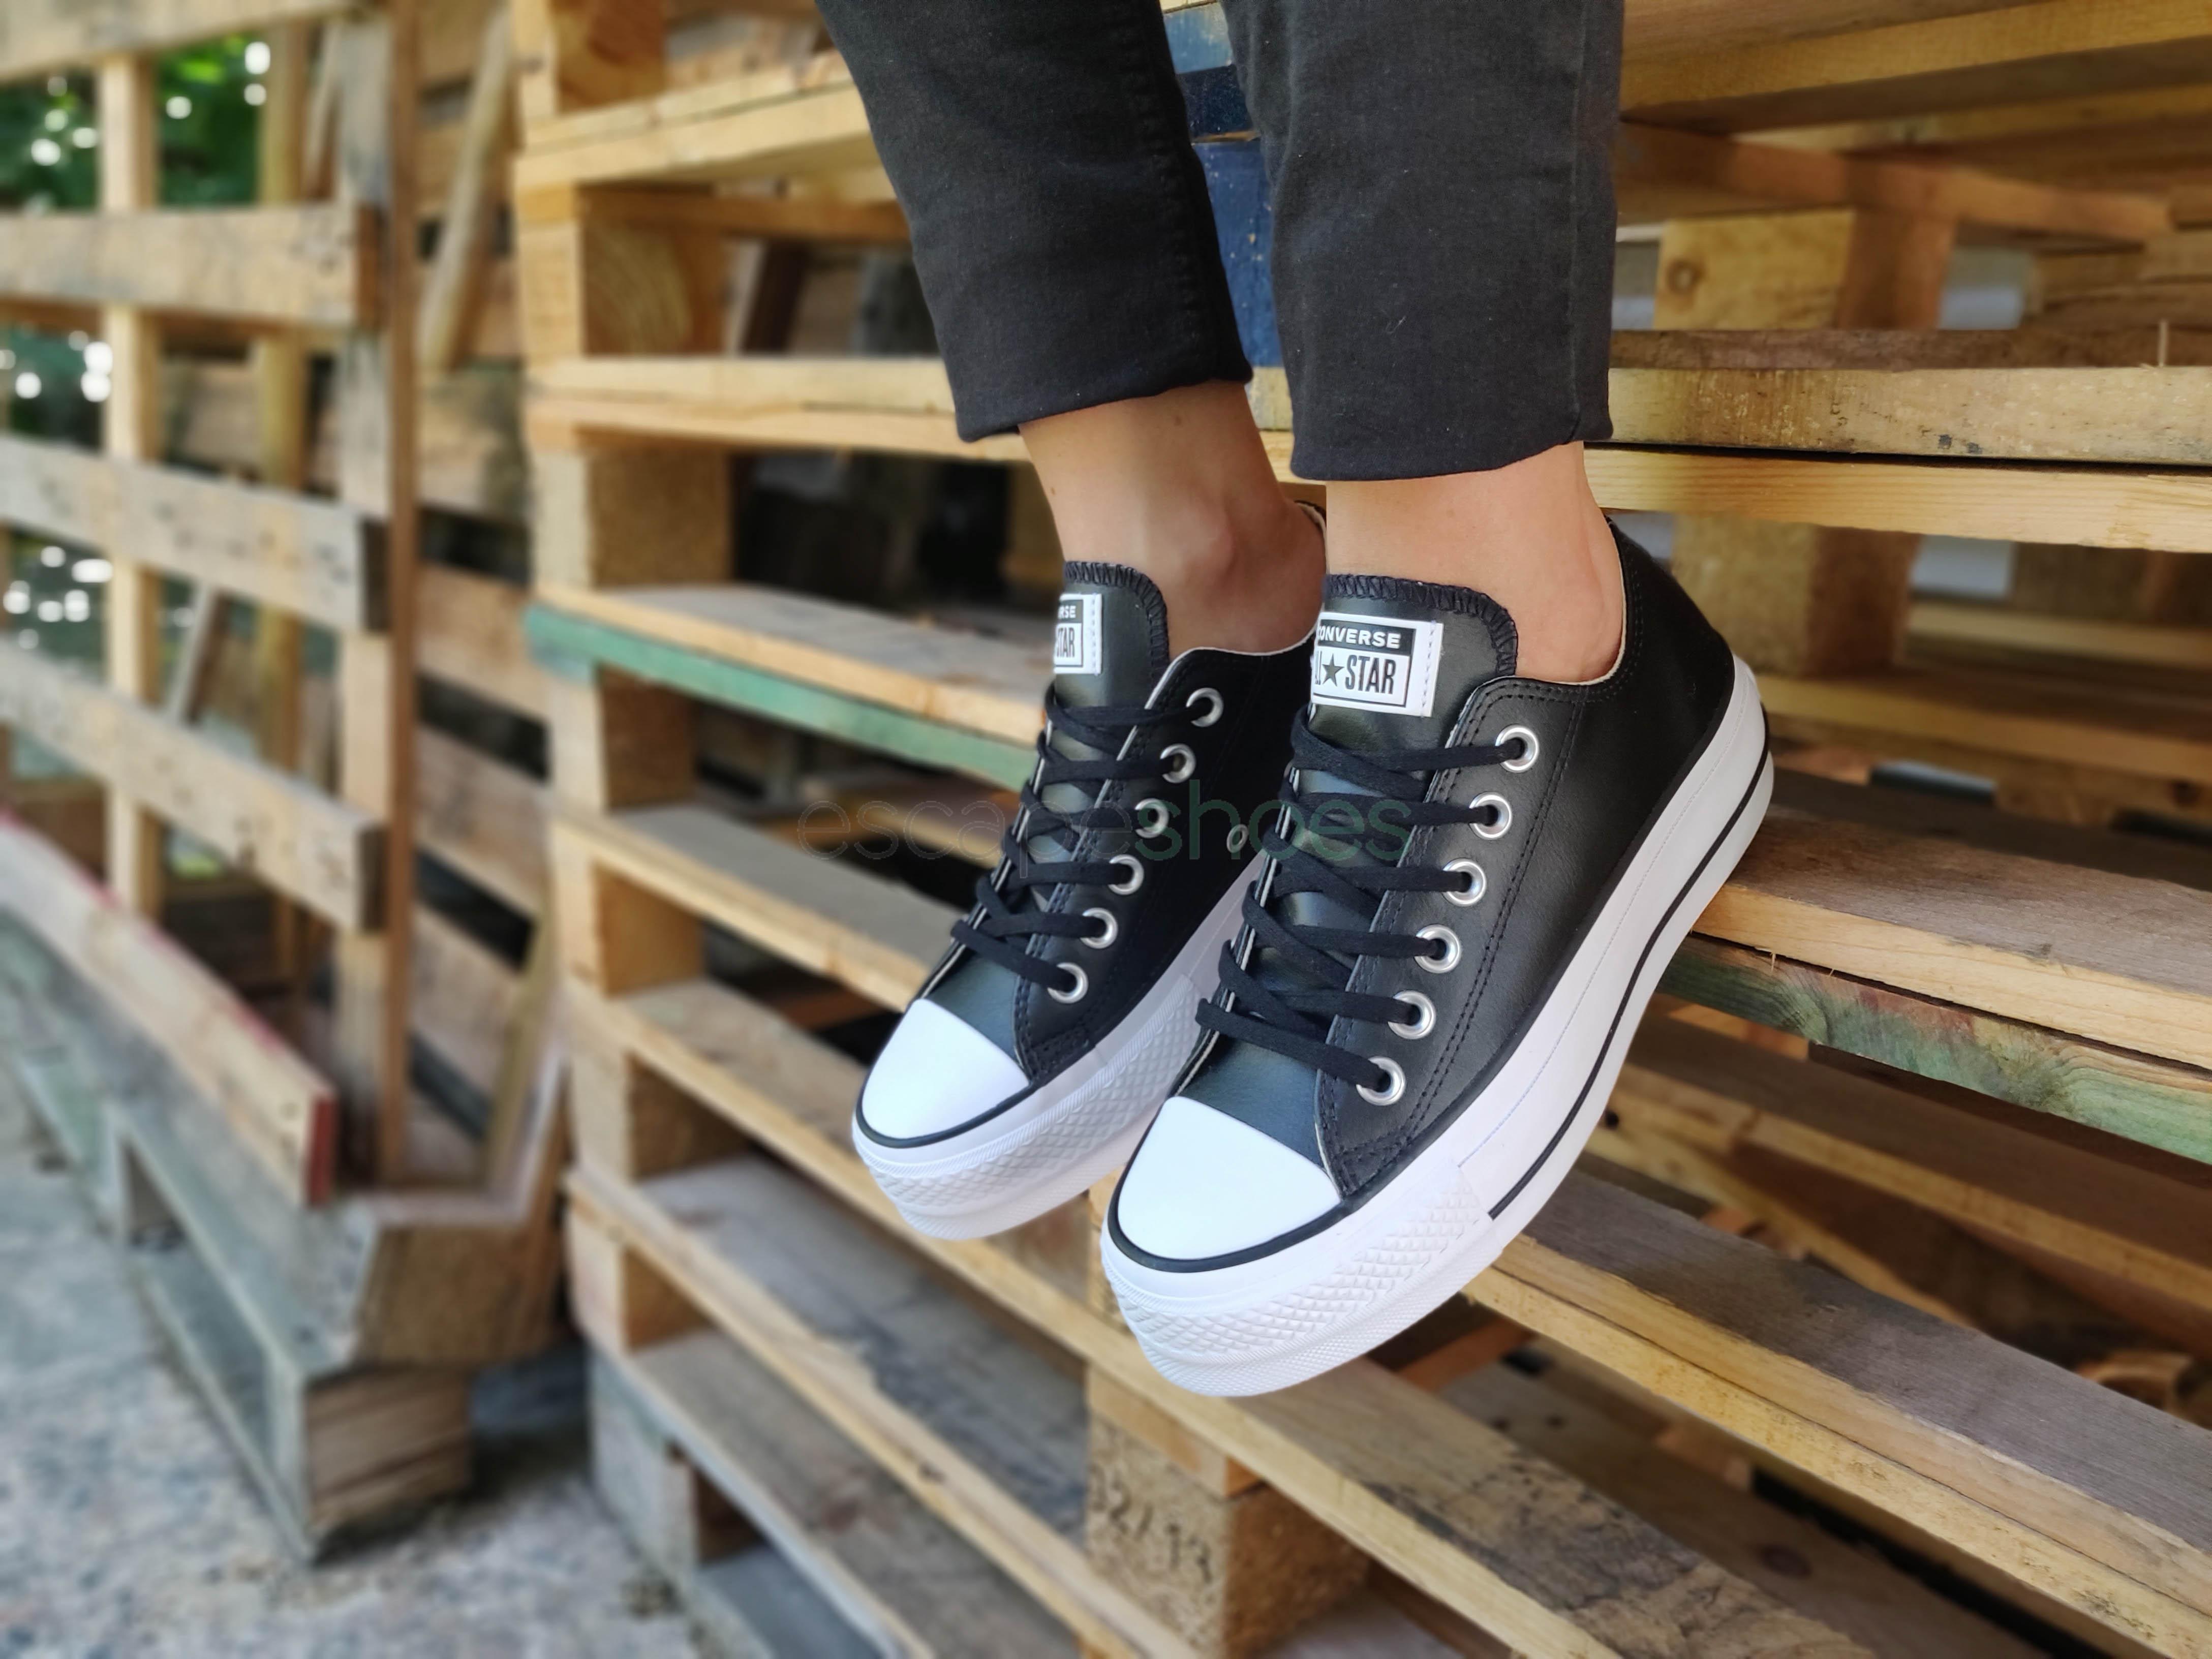 chuck taylor lift leather